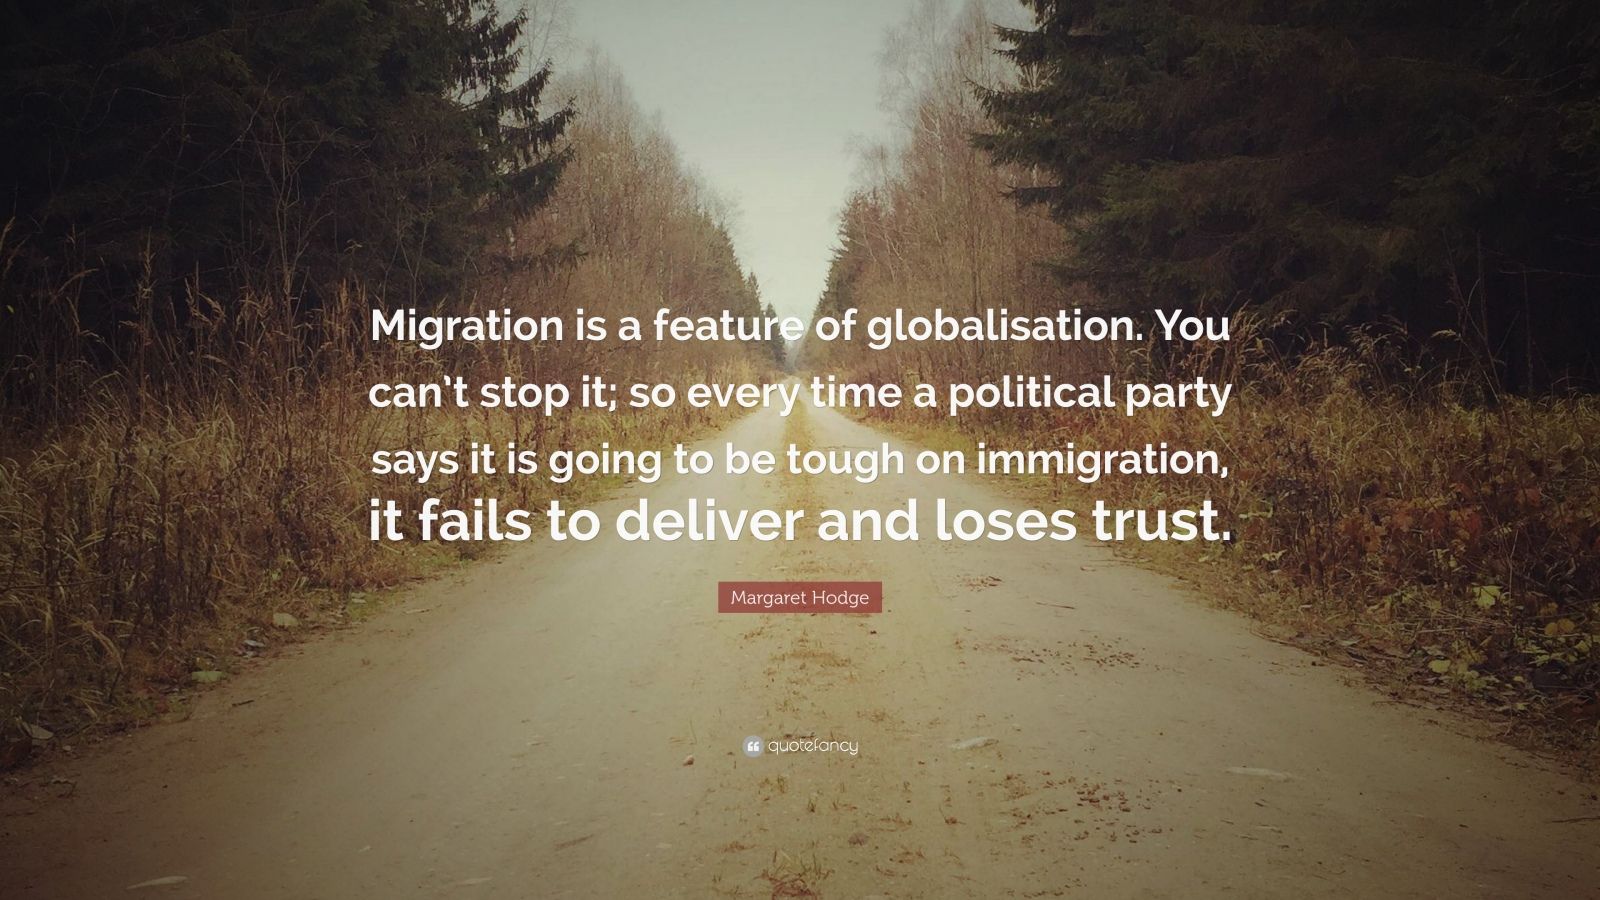 Margaret Hodge Quote “Migration is a feature of